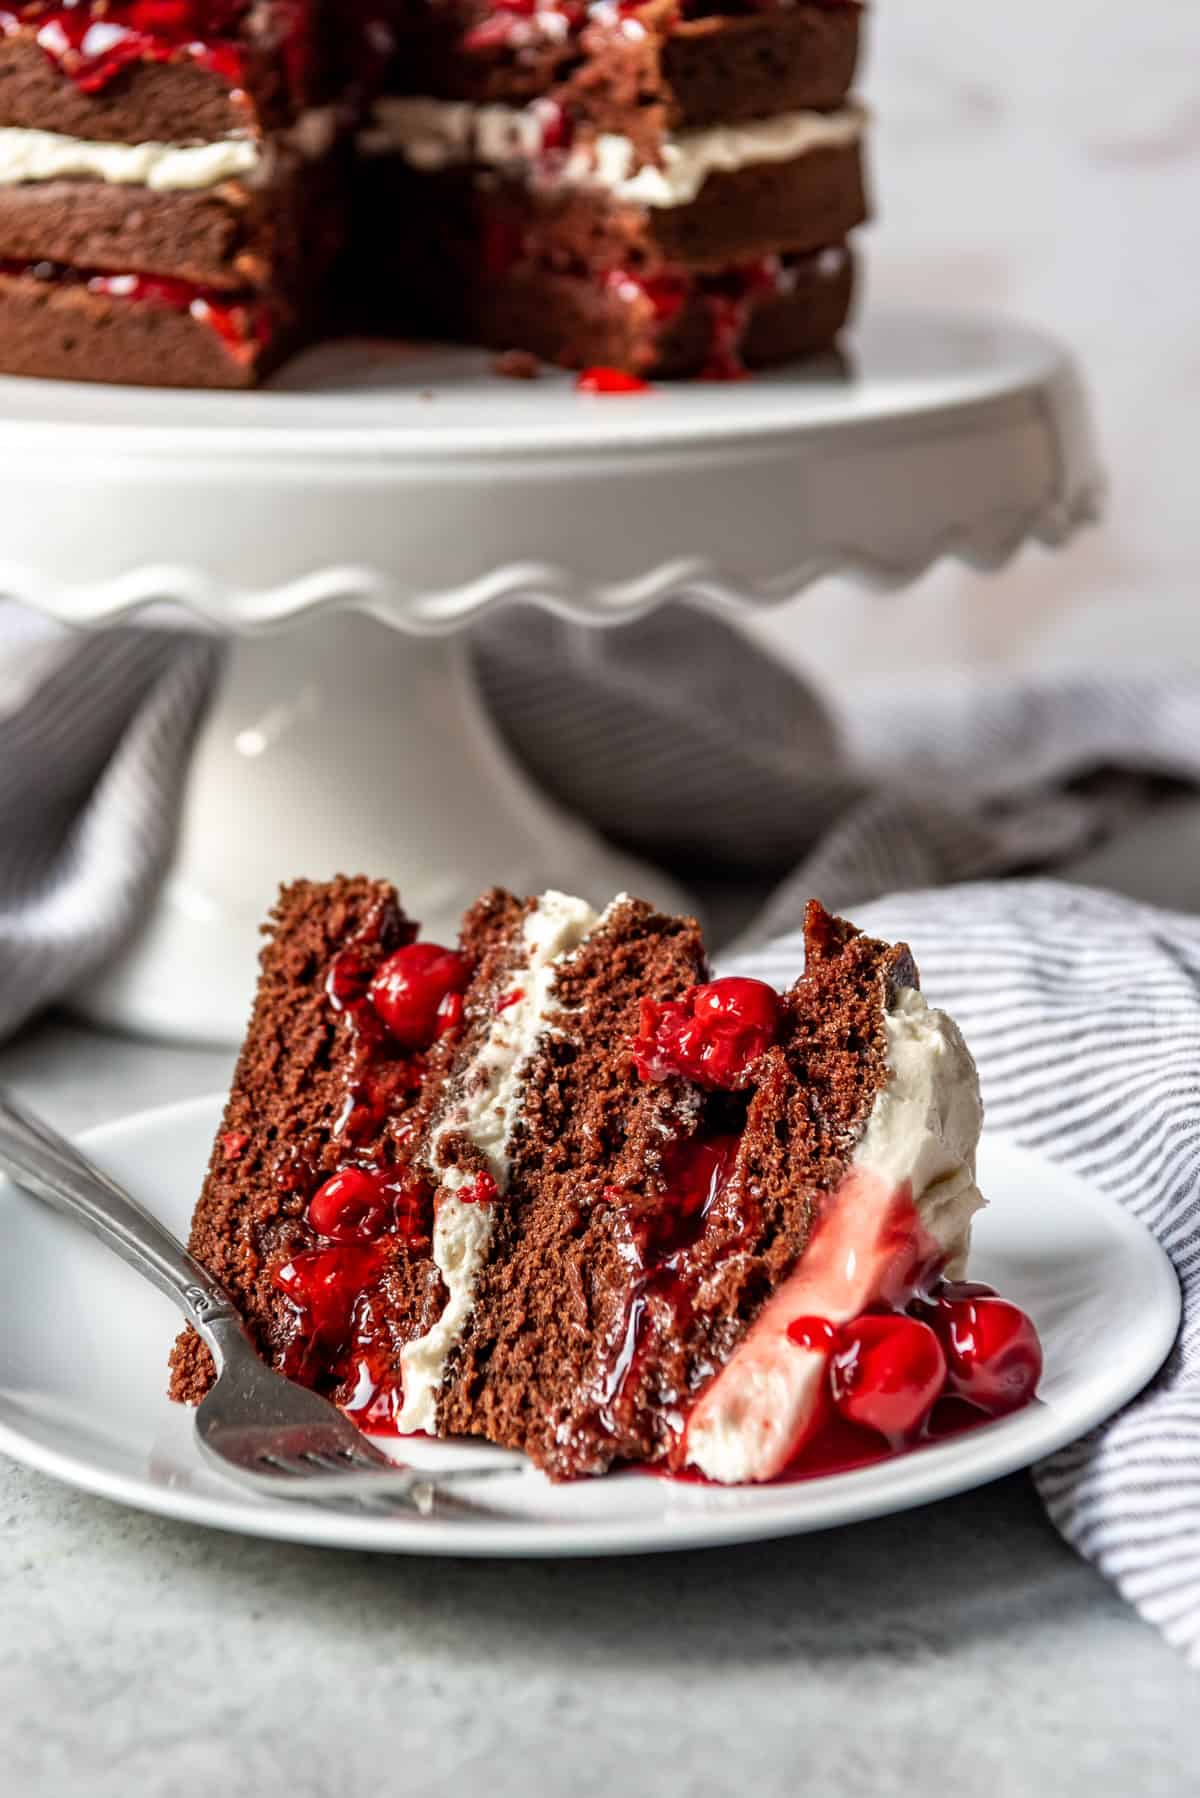 A slice of cherry chocolate Black Forest cake on a white plate with a fork.